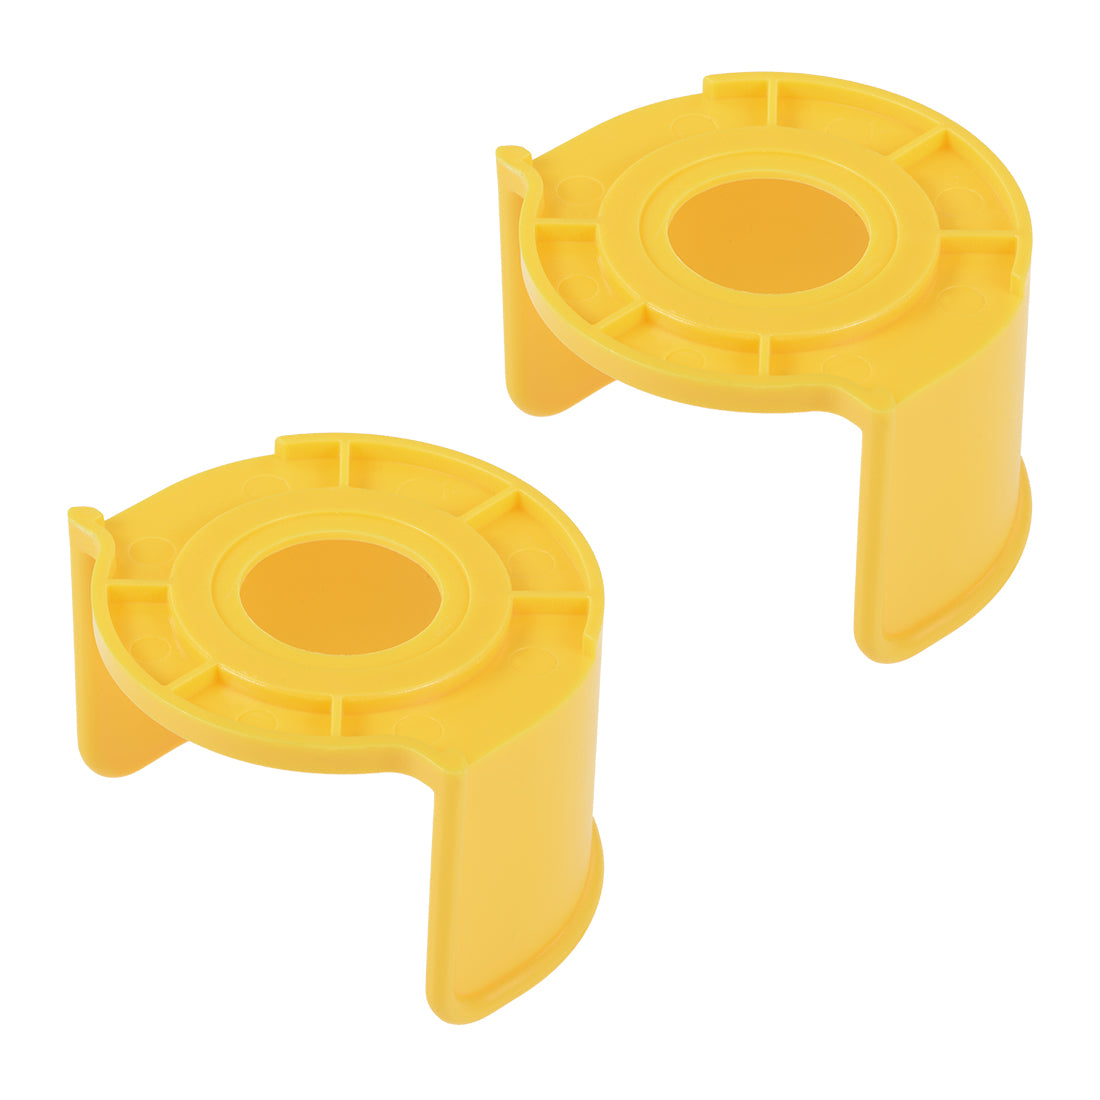 Uxcell Uxcell 30mm Half Circle Emergency Stop Switch Push Switch Button Protective Cover Yellow 2pcs